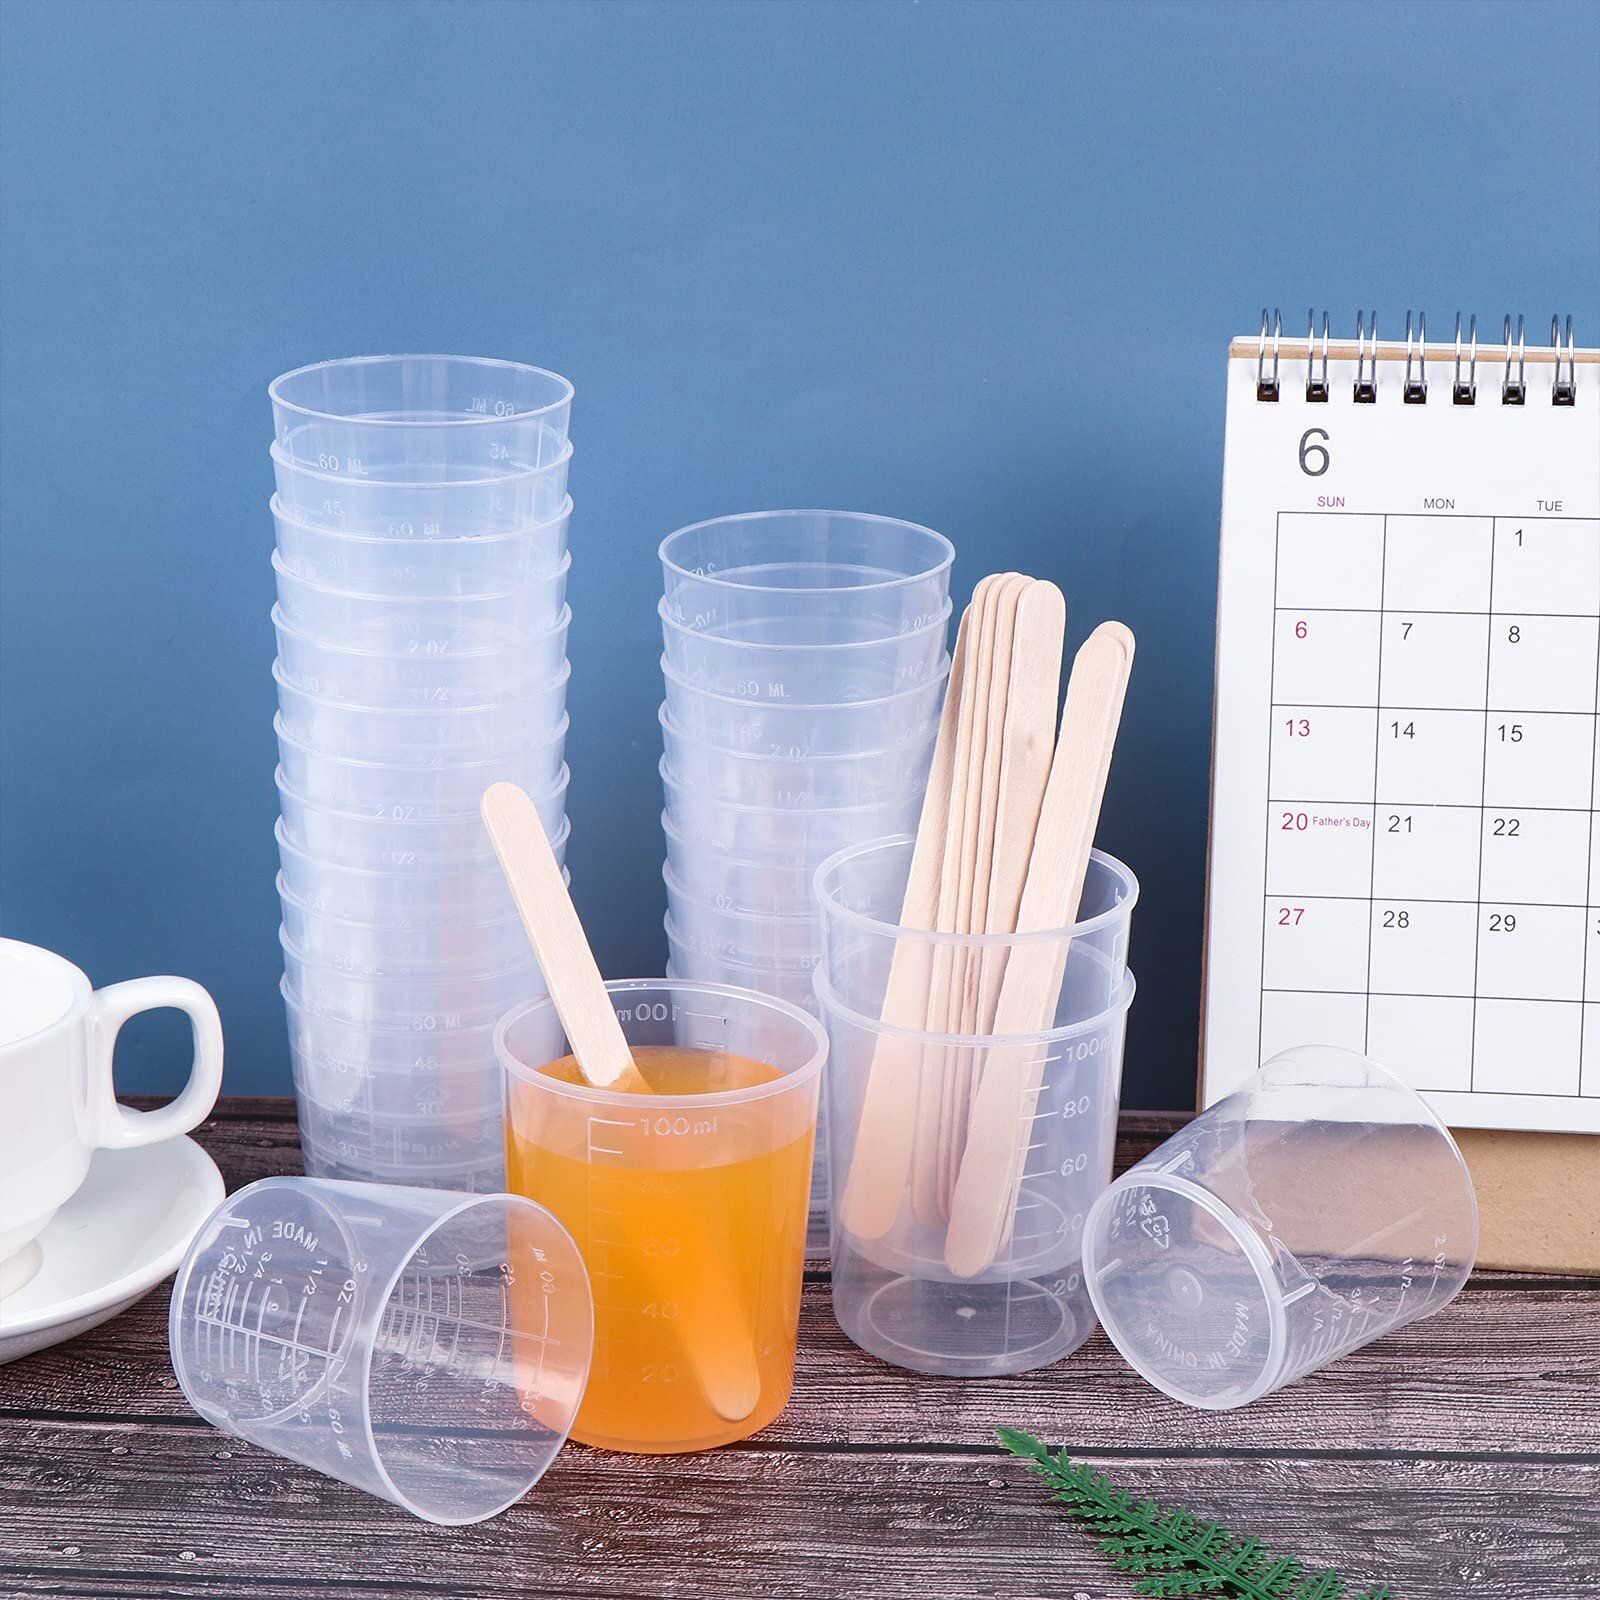 20 Pcs 60 ml Plastic Measuring Cups,Transparent Scale Cups Epoxy Resin Mixing Cups with 10 Stirring Bars,Graduated Cups Measuring Jug for Making Crafting Mixing Paint Stain Epoxy and Resin 